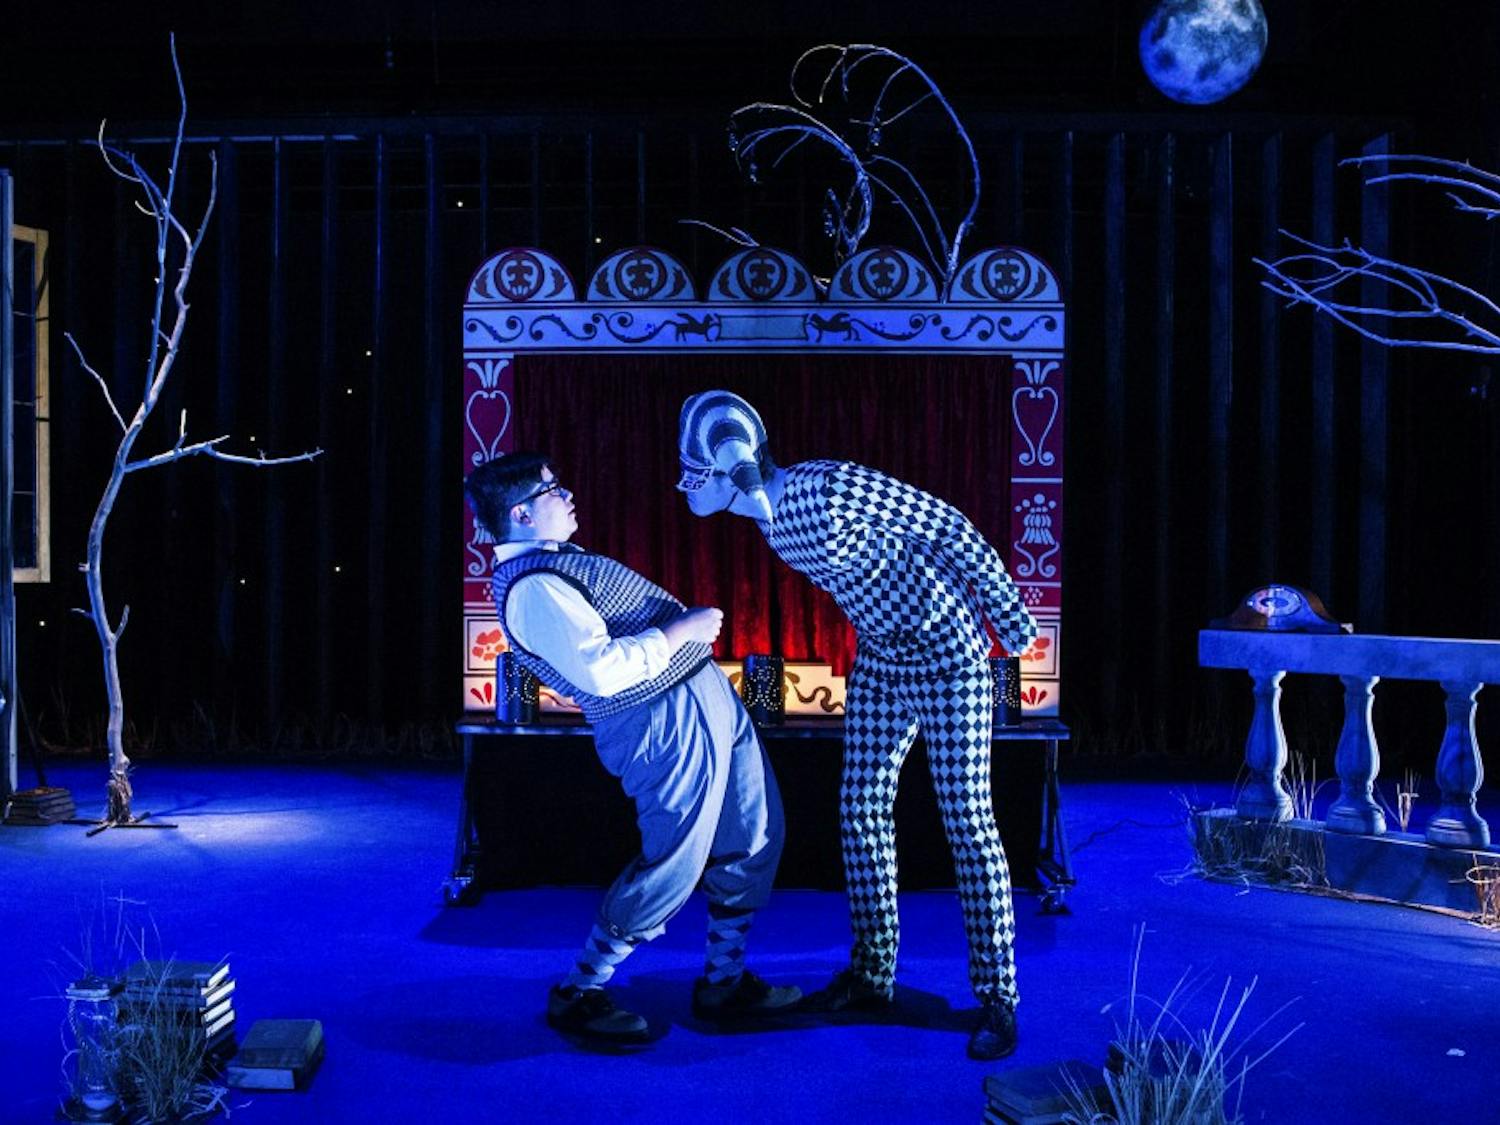 Andres Moreno’s character (left) encounters the harlequin played by Michael McMahan (right) in the production of ”As Five Years Pass.” The play was written by Federico García Lorca.